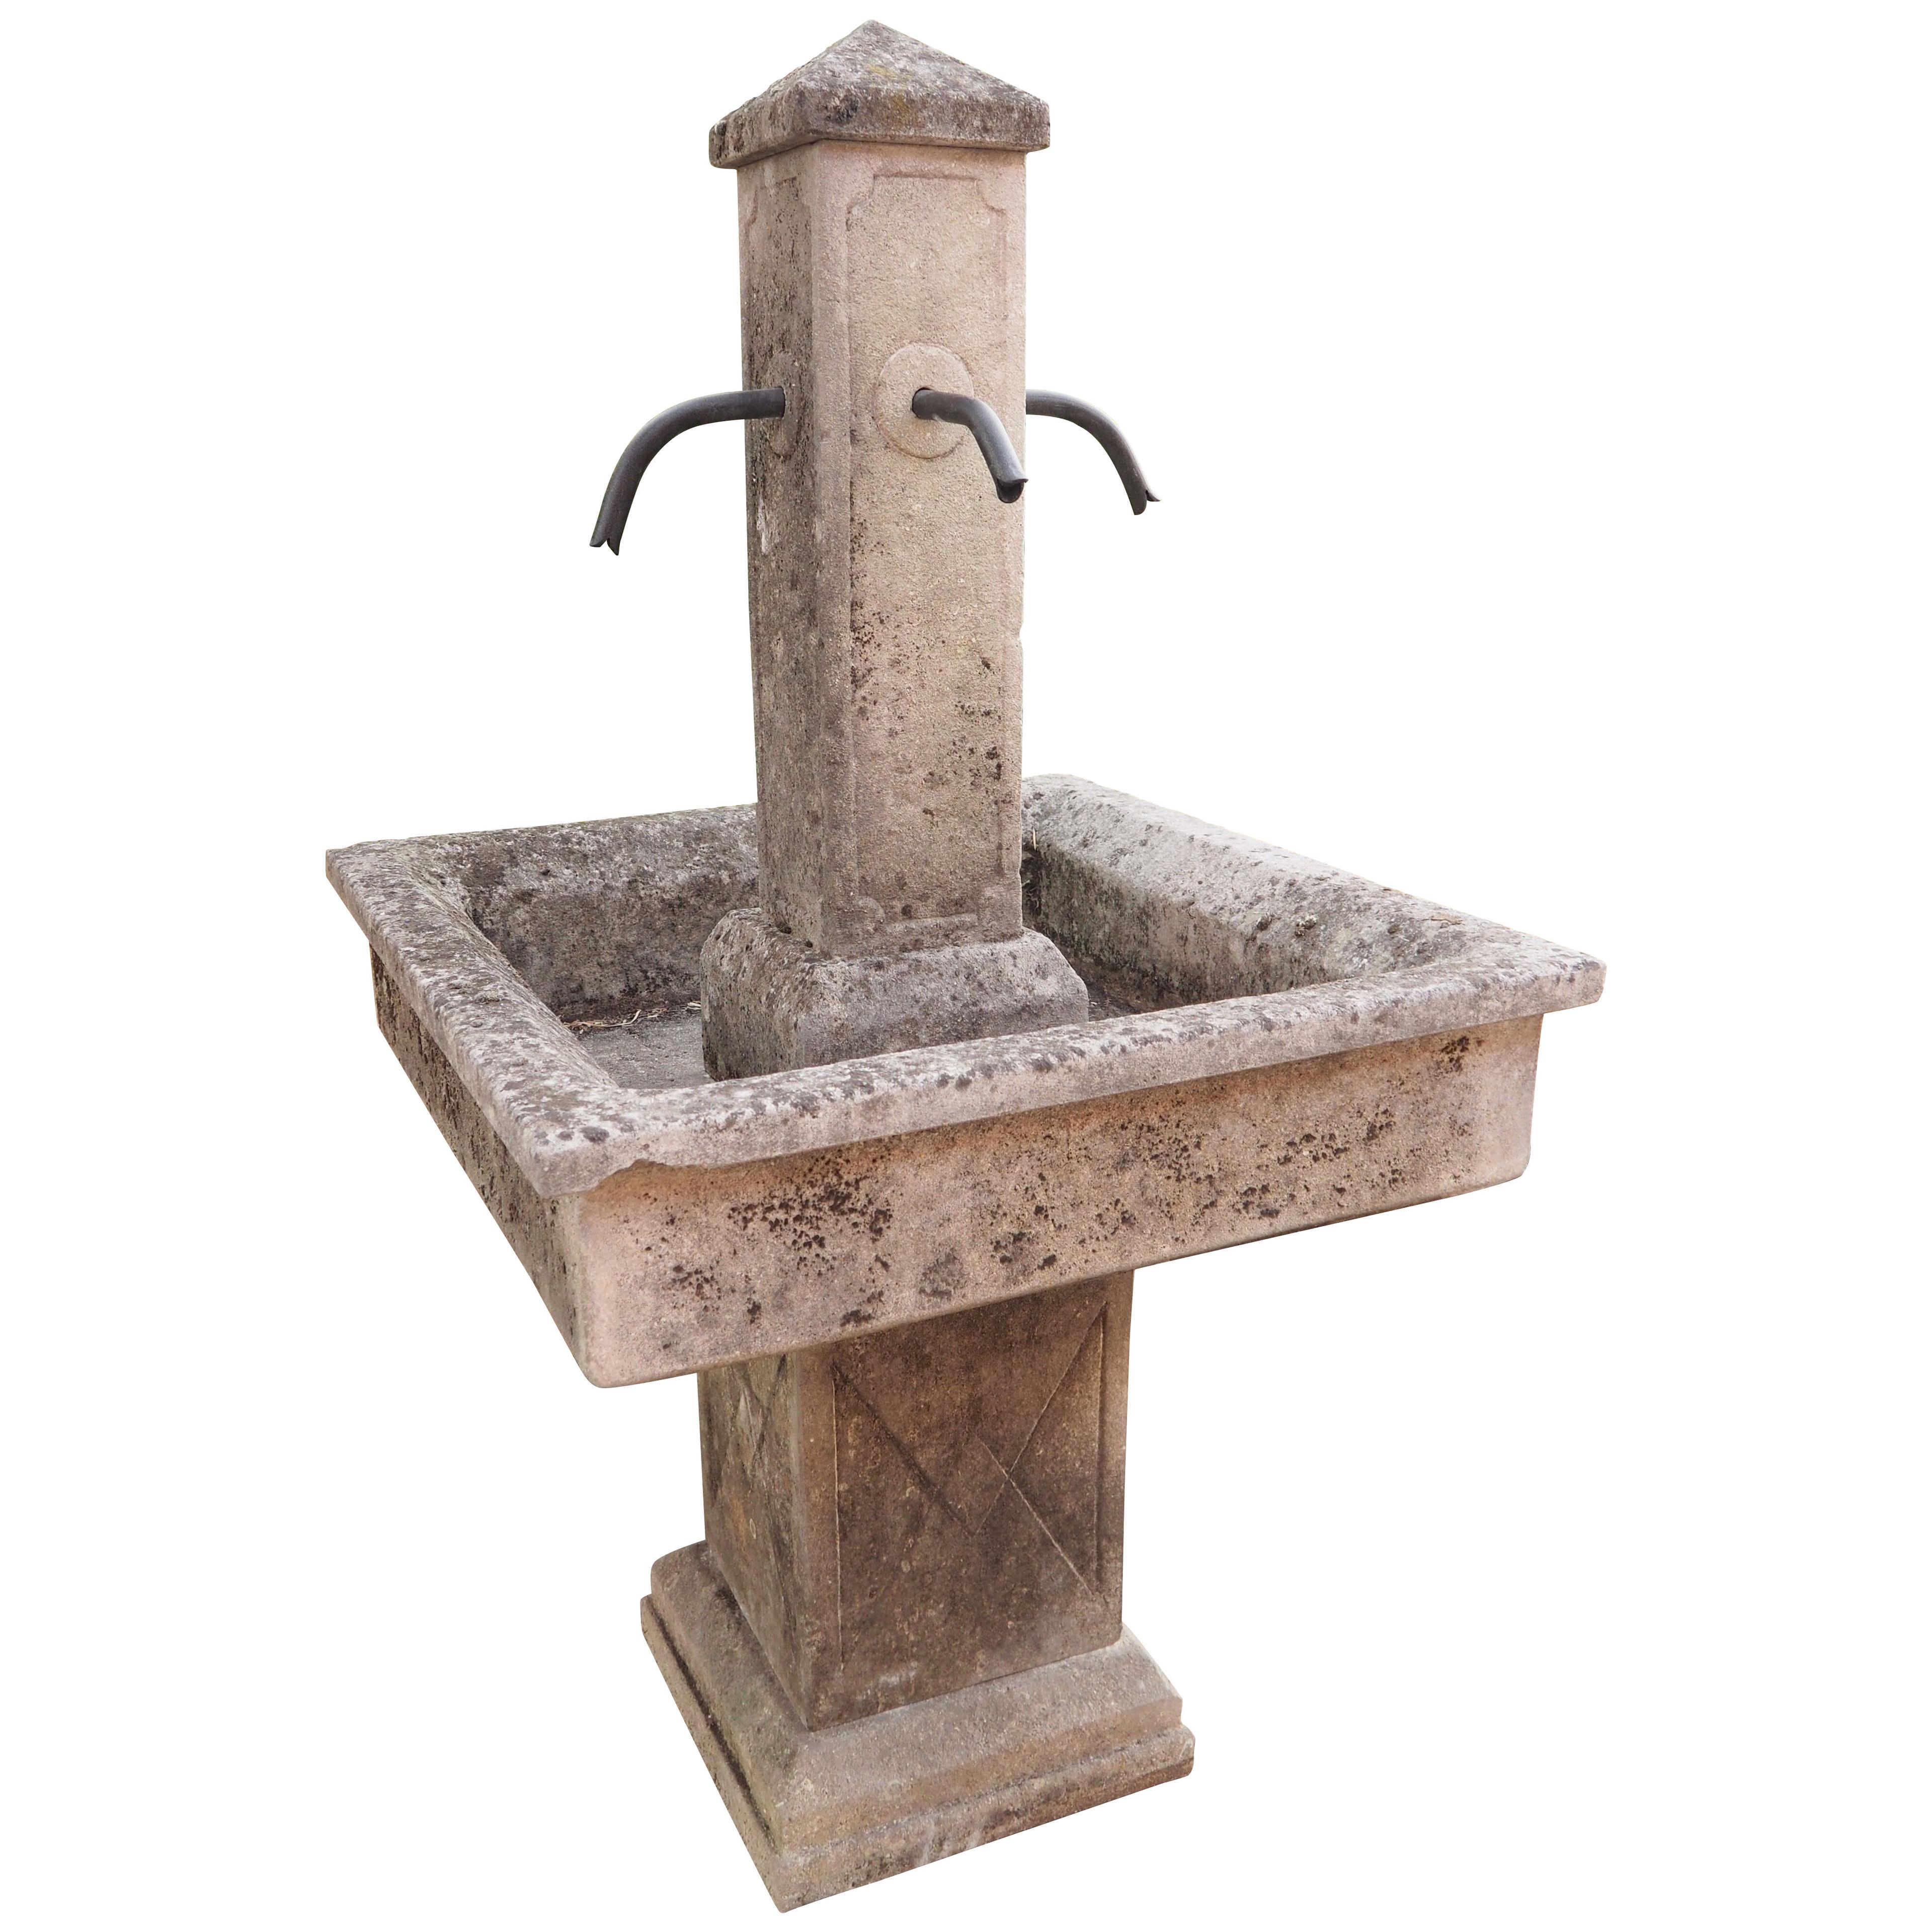 Carved Italian Standing Center Fountain with Elevated Basin